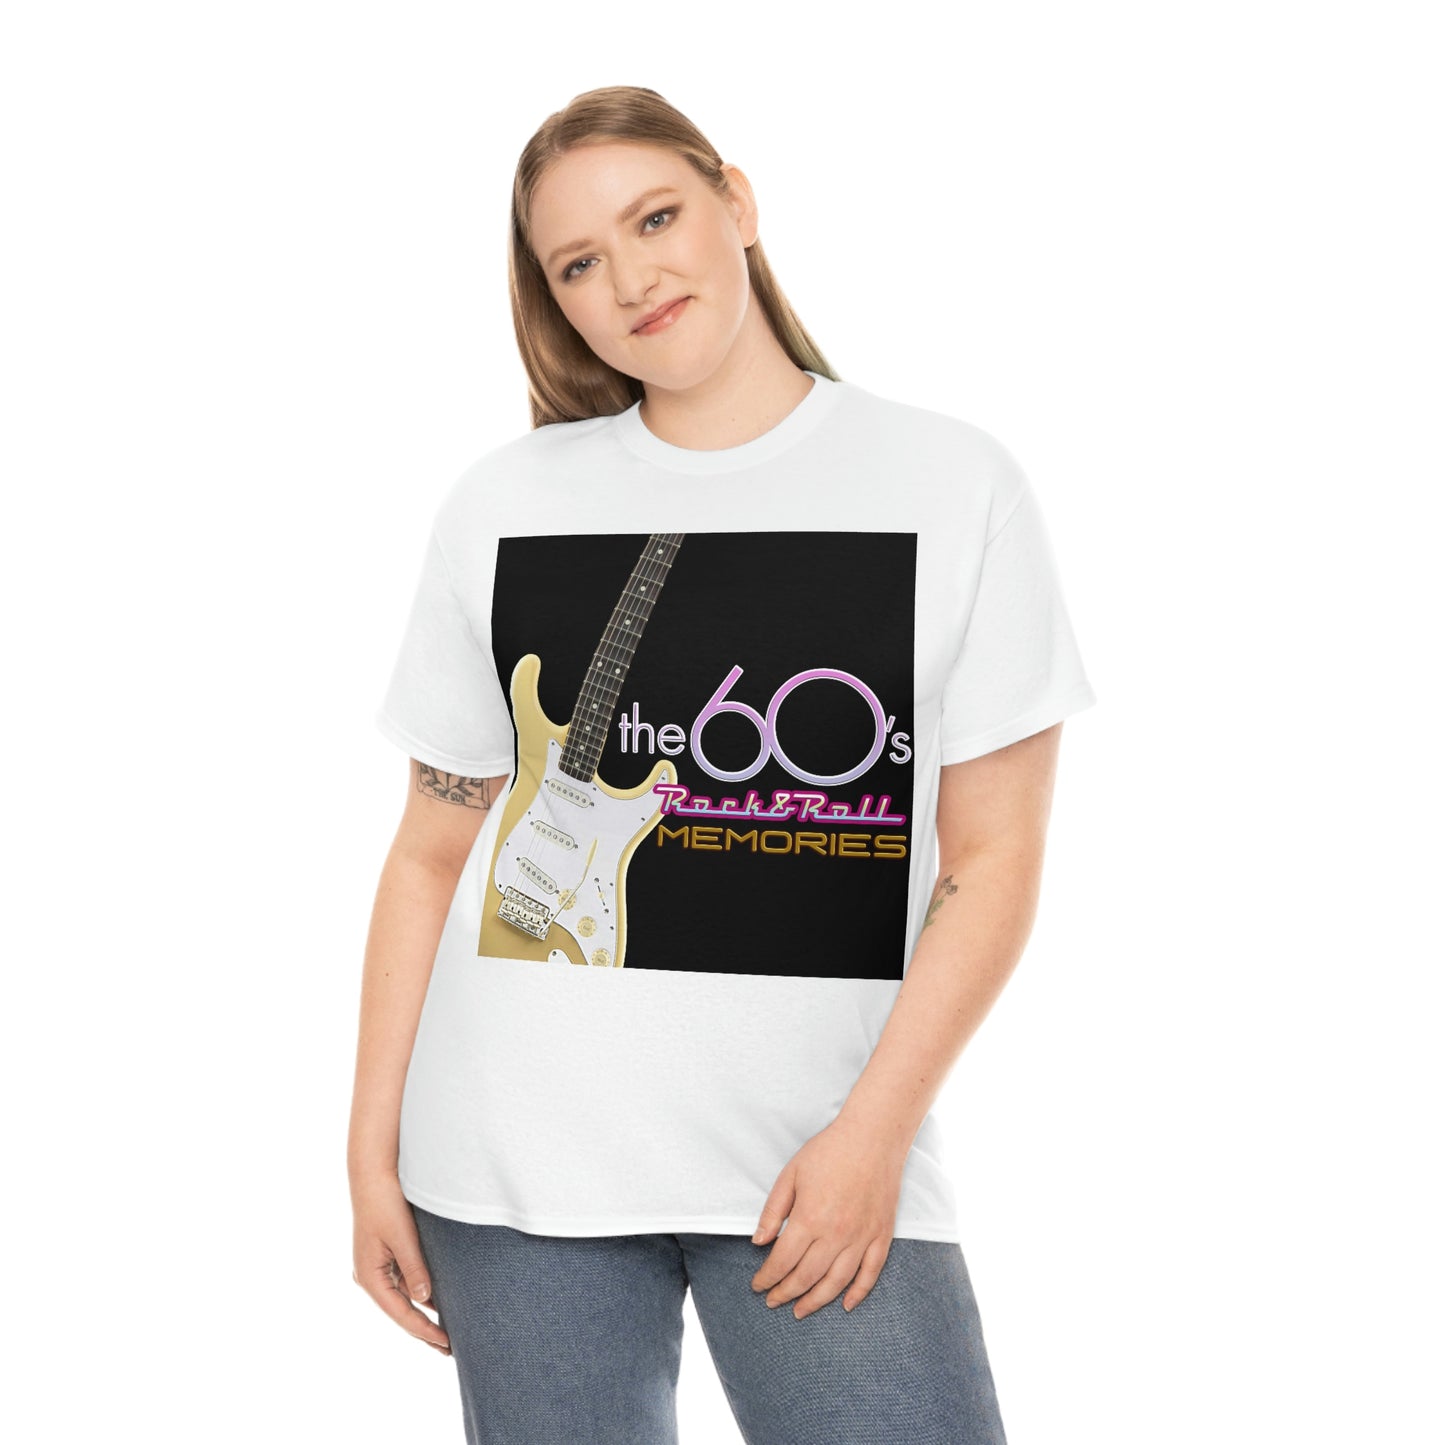 60's Rock and Roll Memories T Shirt